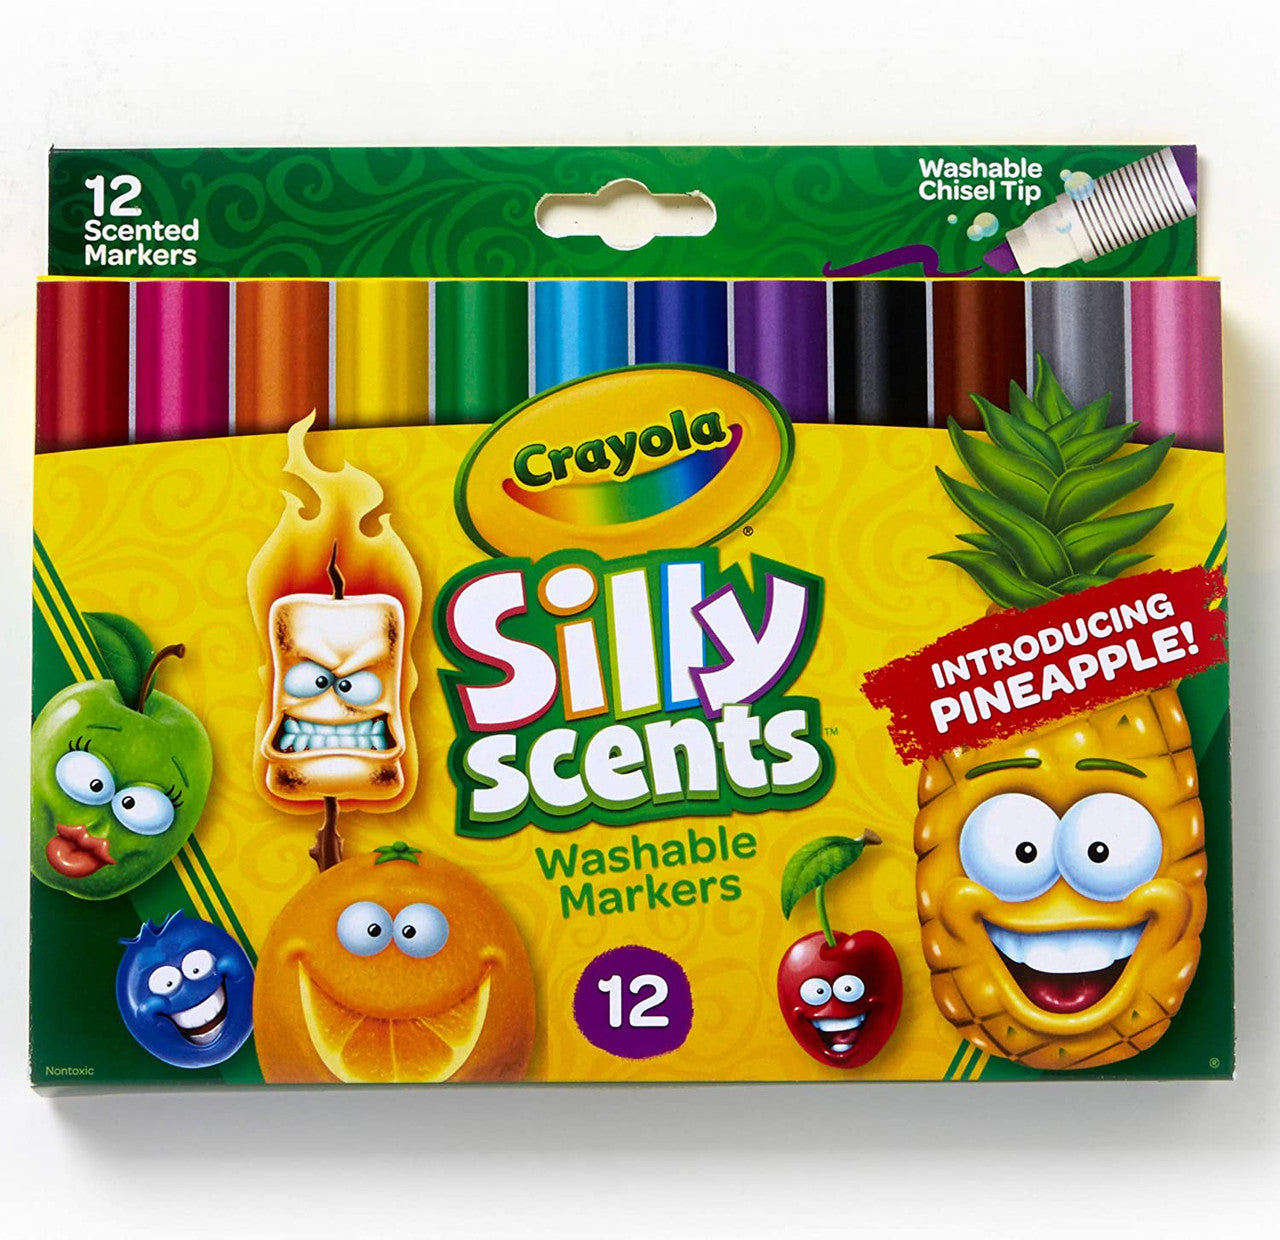 Crayola Silly Scents Wedge Tip Scented Washable Markers (12 count)